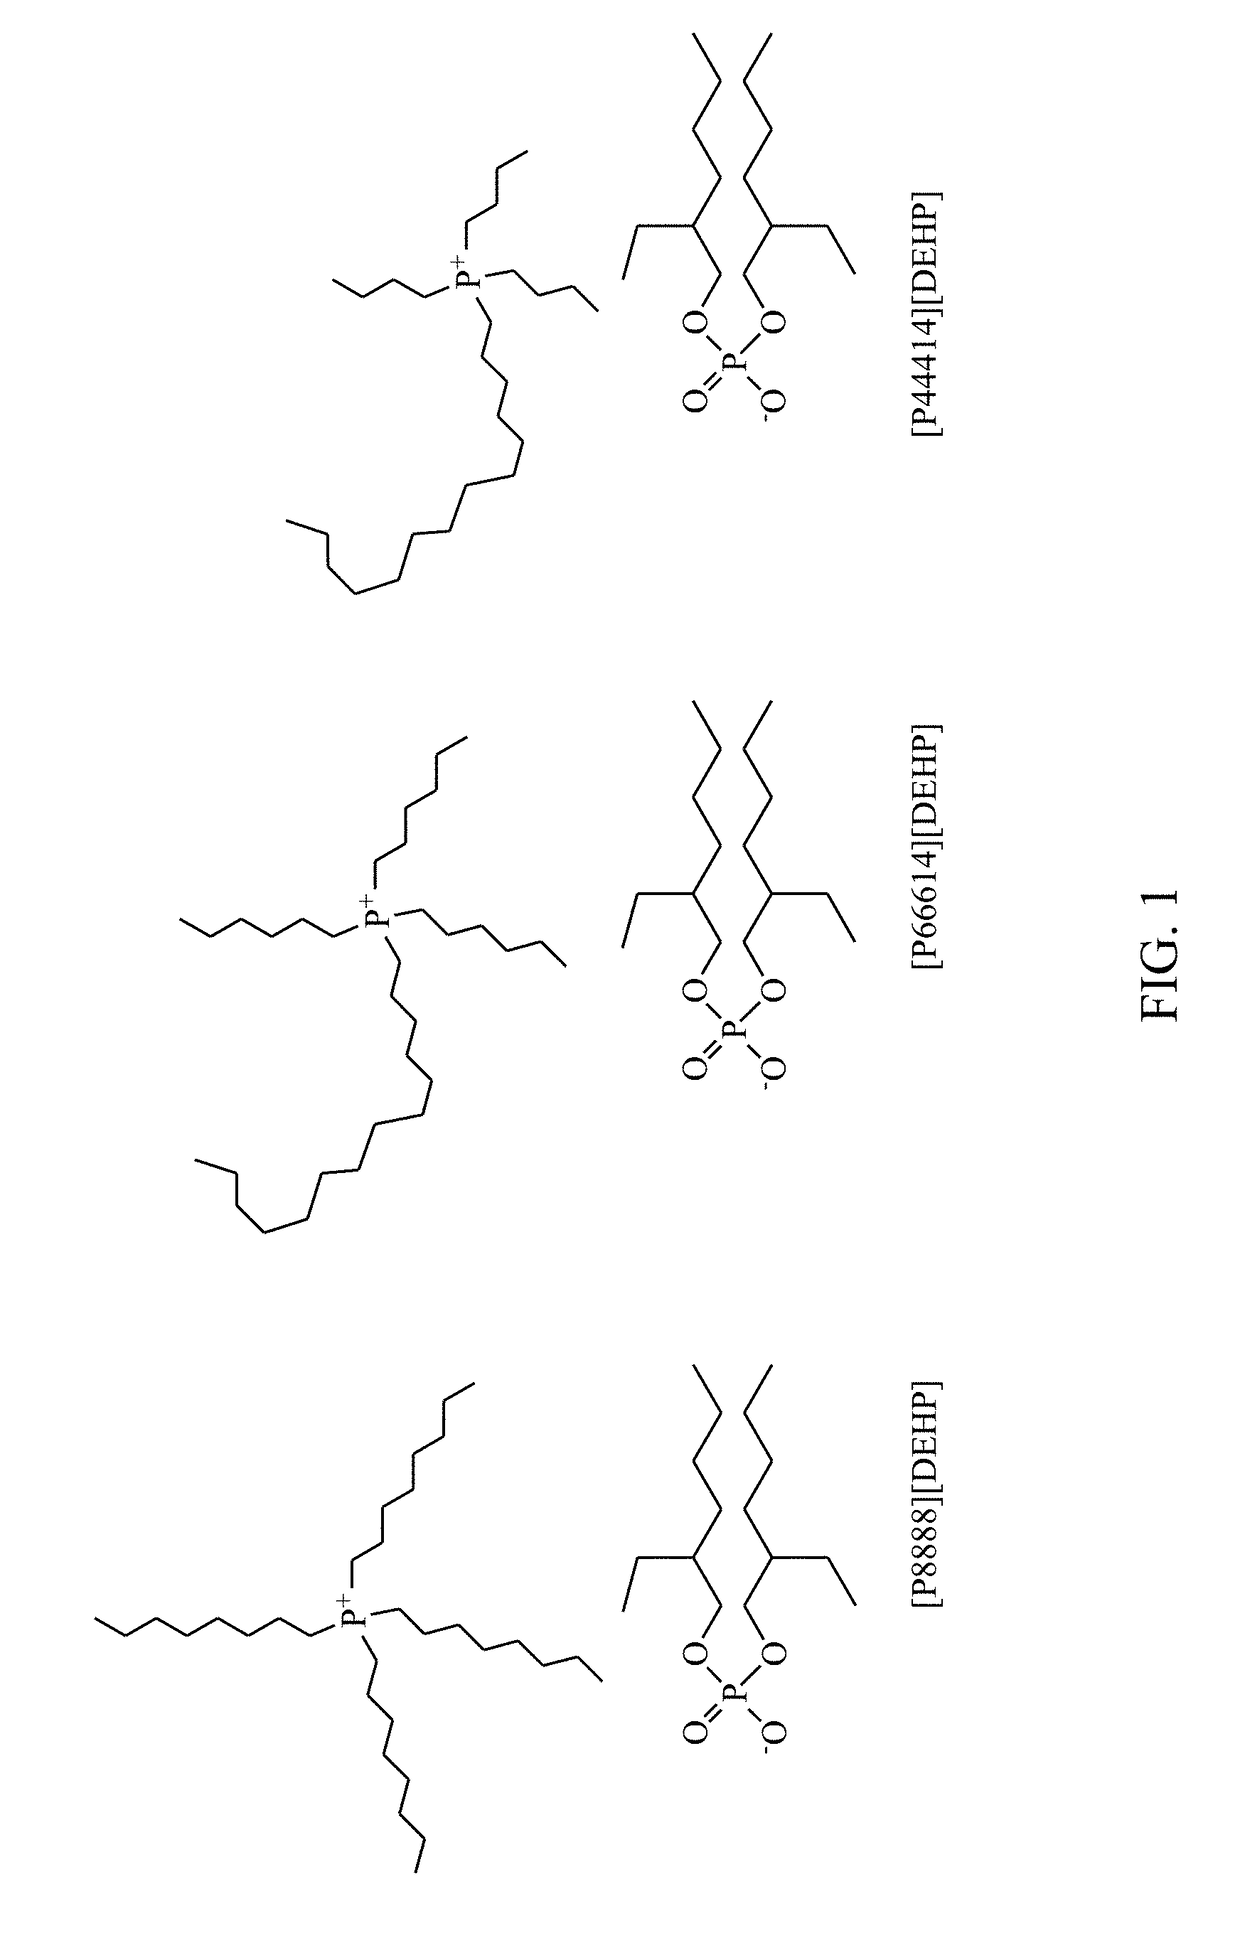 Ionic liquids containing symmetric quaternary phosphonium cations and phosphorus-containing anions, and their use as lubricant additives